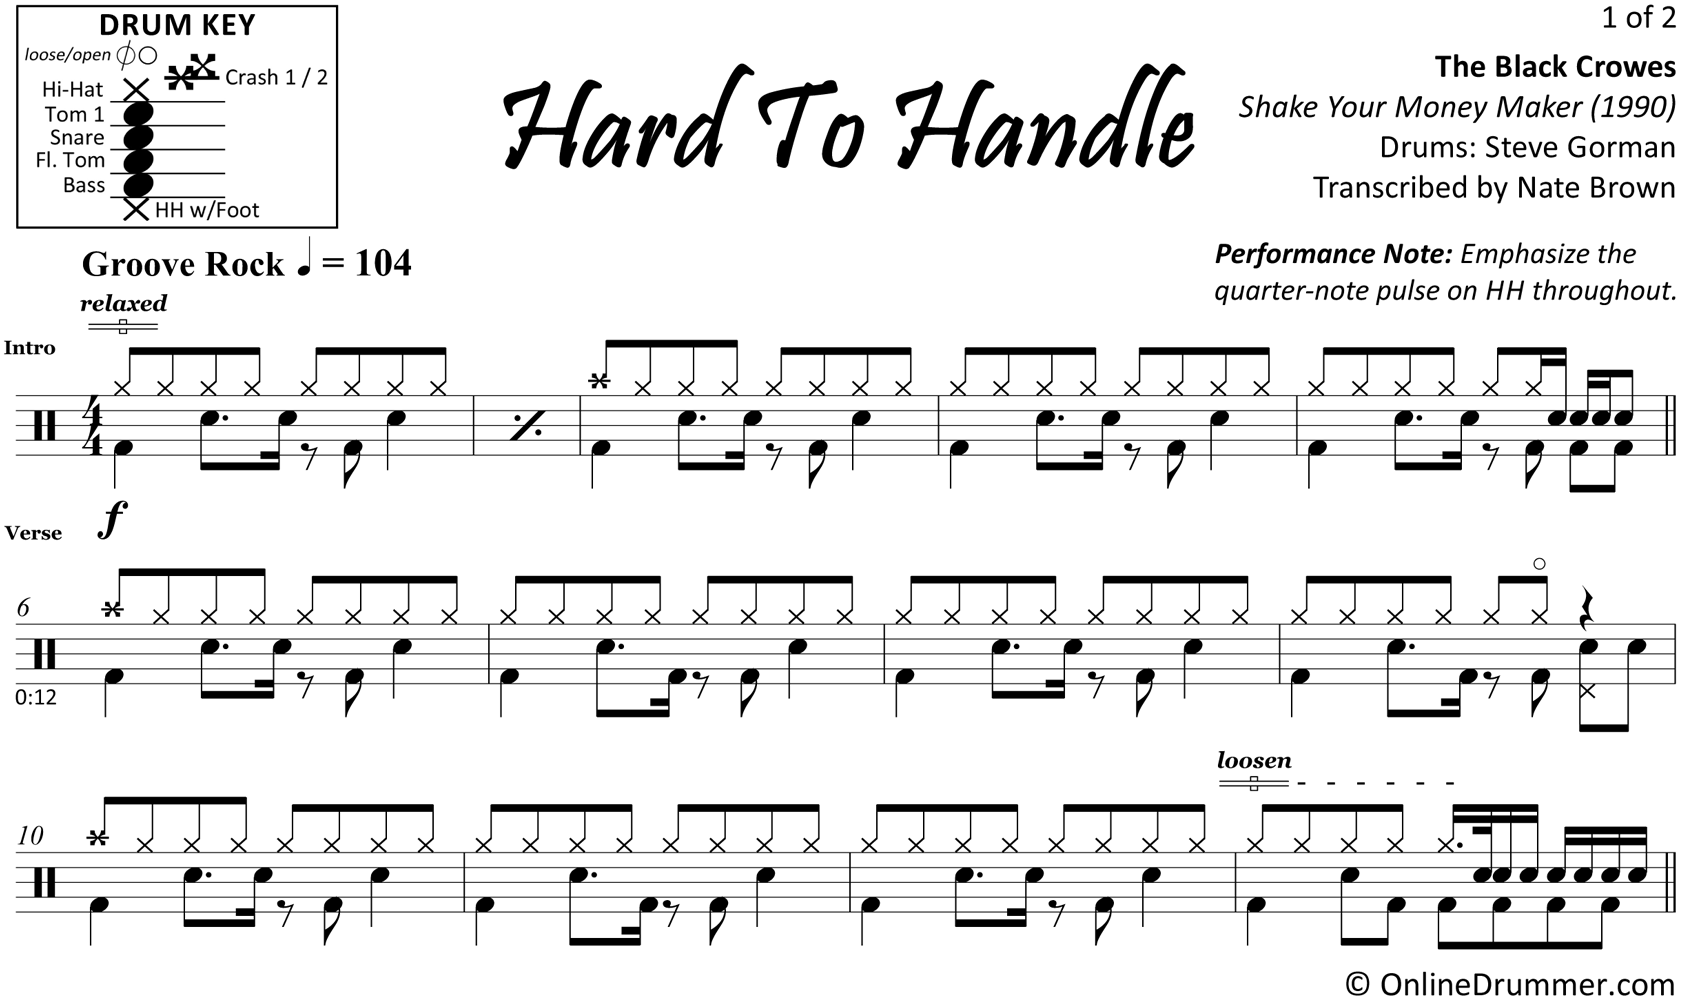 Hard To Handle - The Black Crowes - Drum Sheet Music